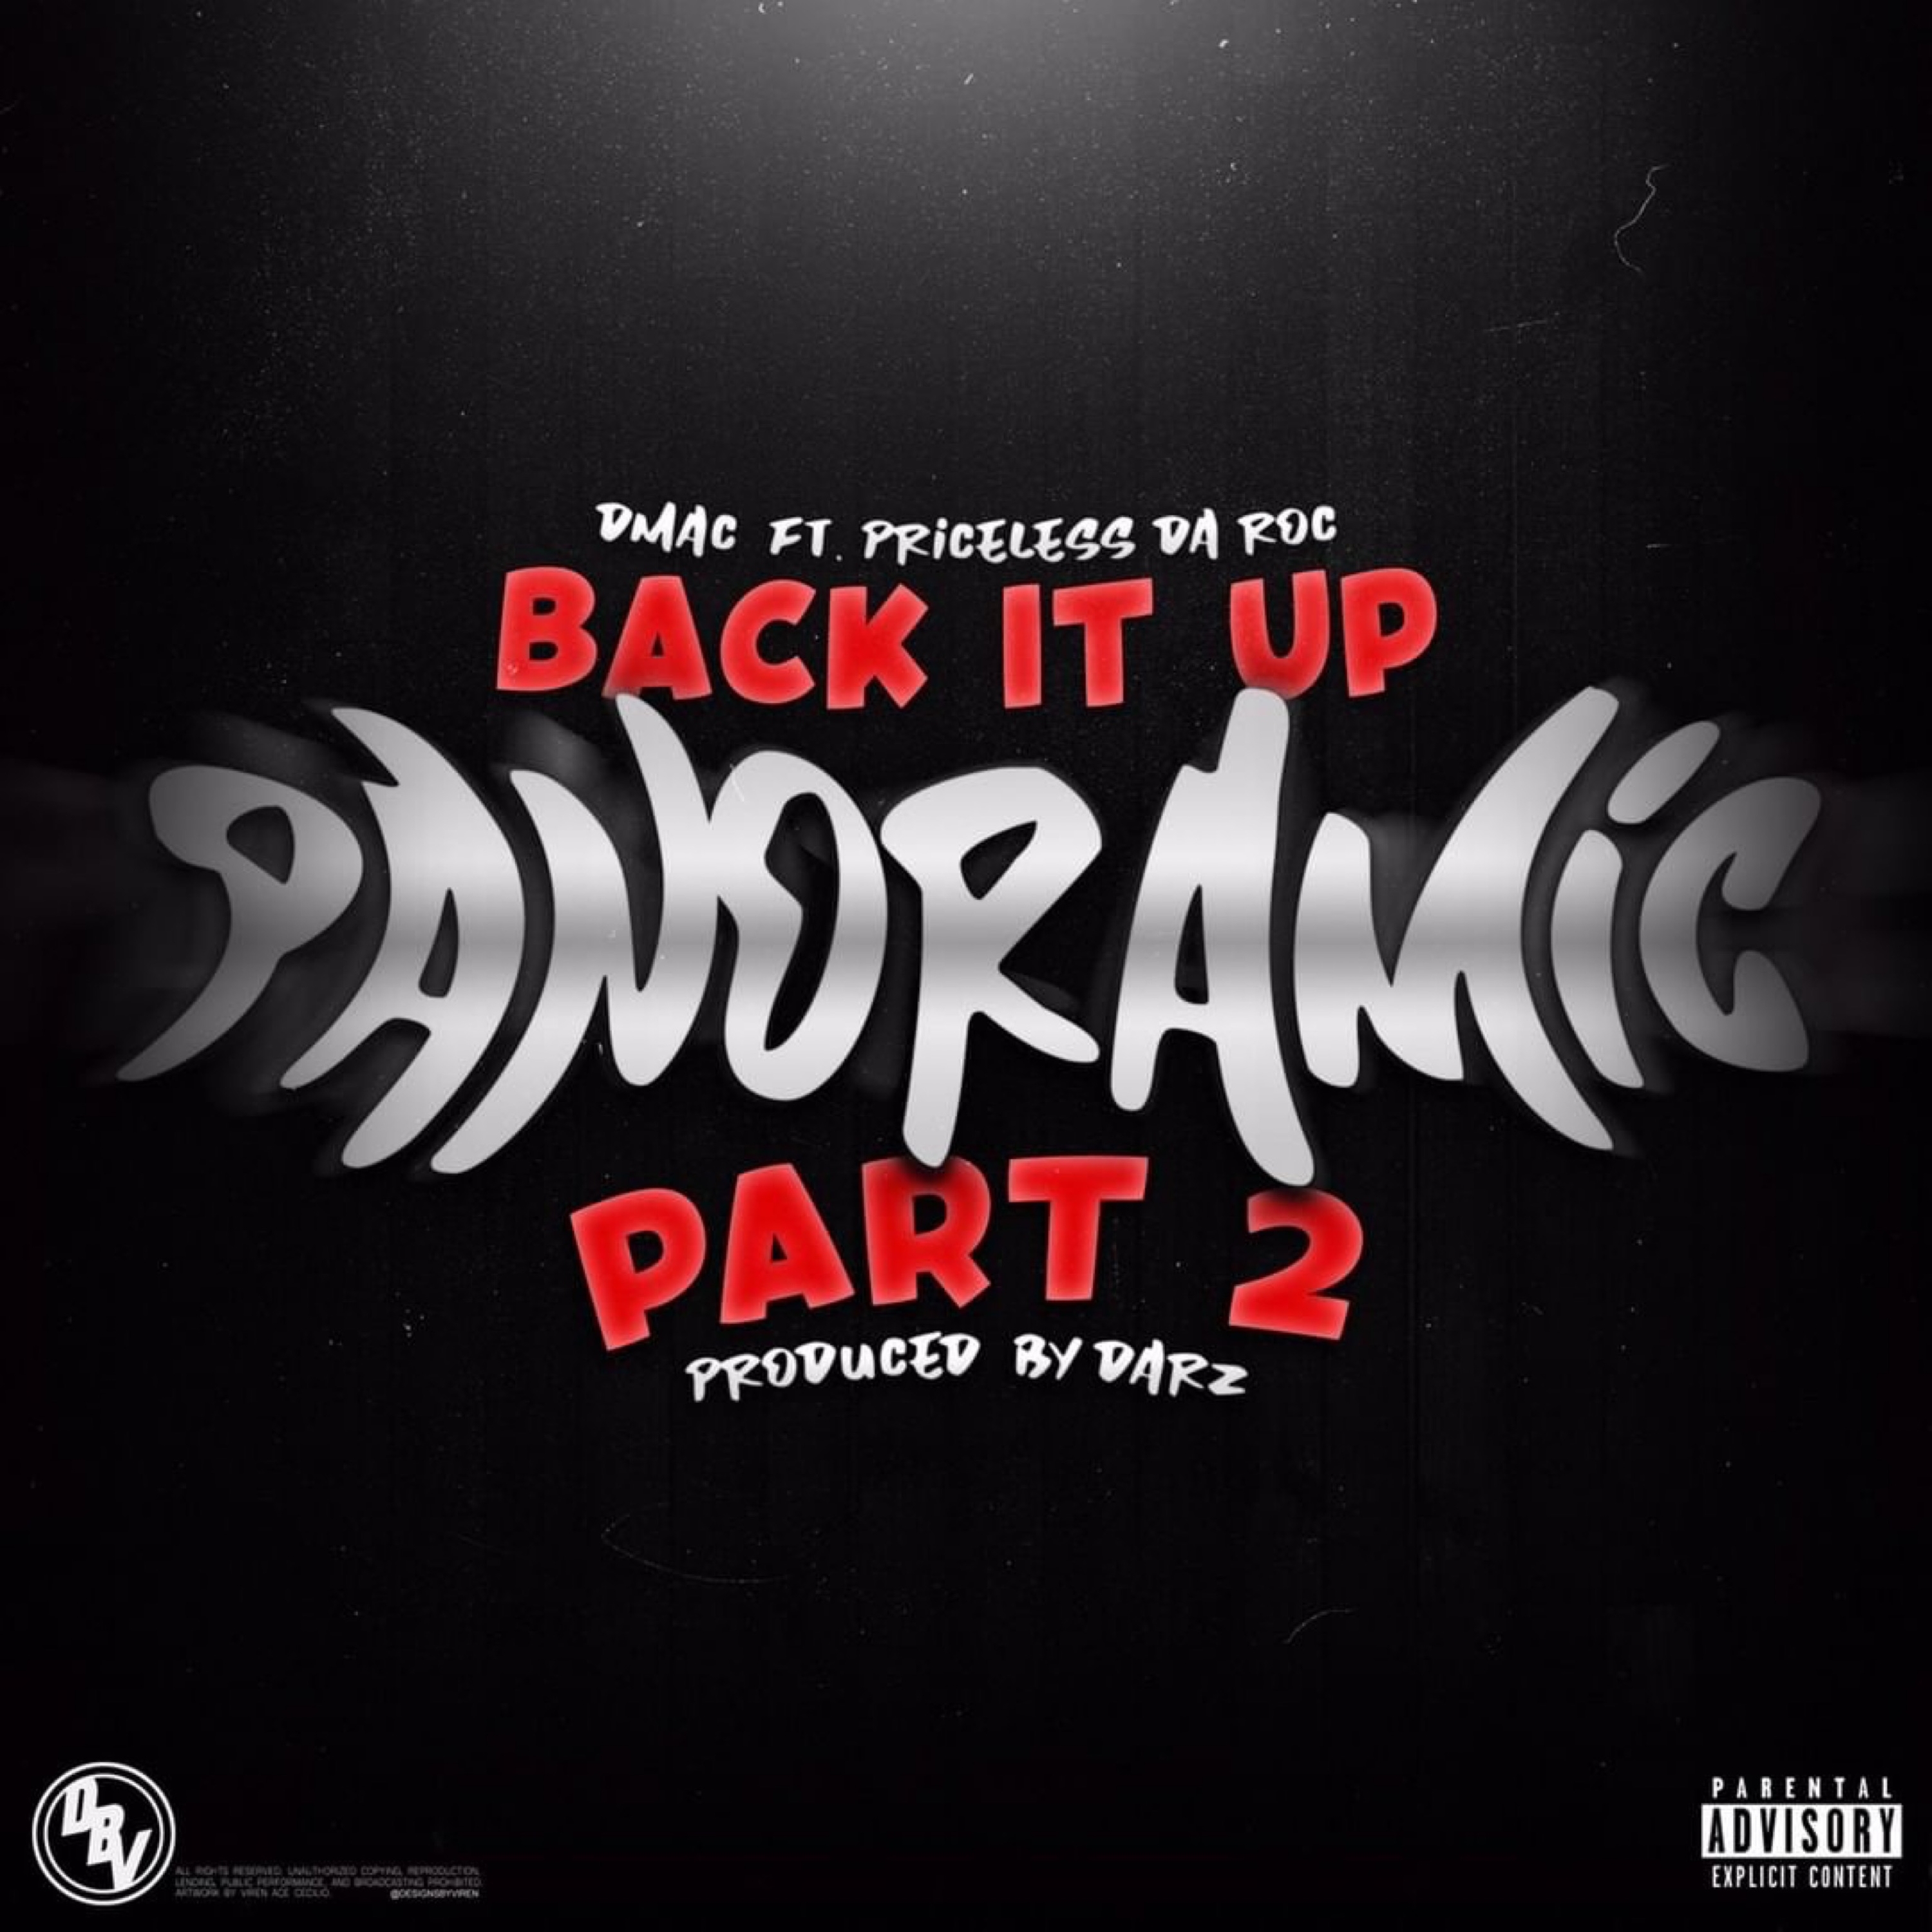 Back It Up: Panoramic, Pt. 2